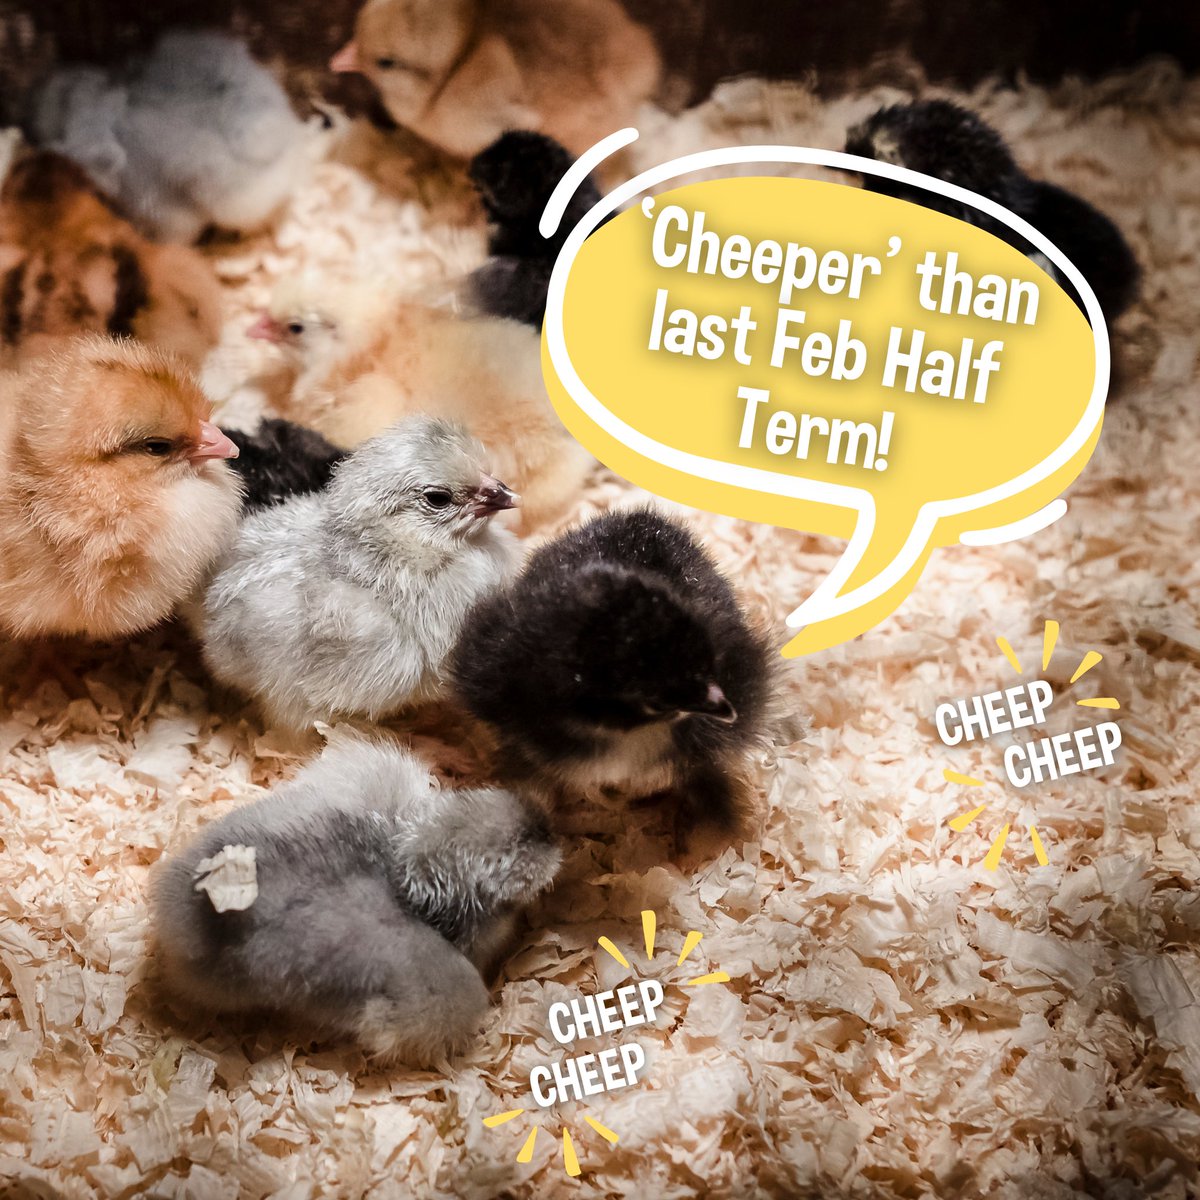 Don’t forget our EGGCITING NEWS! 🐣This Feb Half Term, our tickets are actually ‘cheeper’ than last year! 🤩 We’re trying to do our bit to give back to our incredible customers! ☺️ Book now! 👉 adventurefarm.co.uk